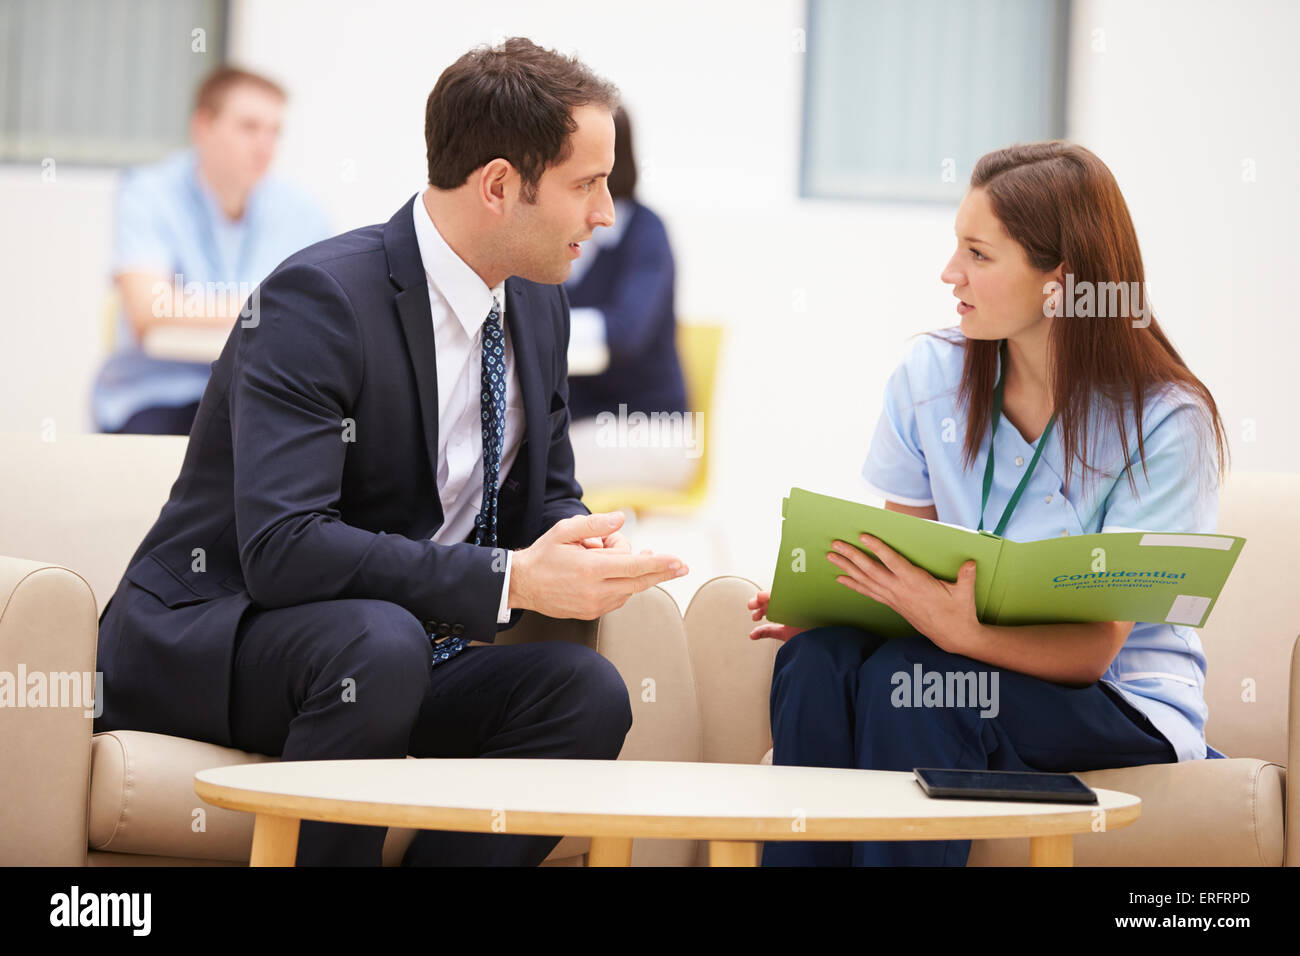 Businessman Discussing Test Results With Nurse Stock Photo